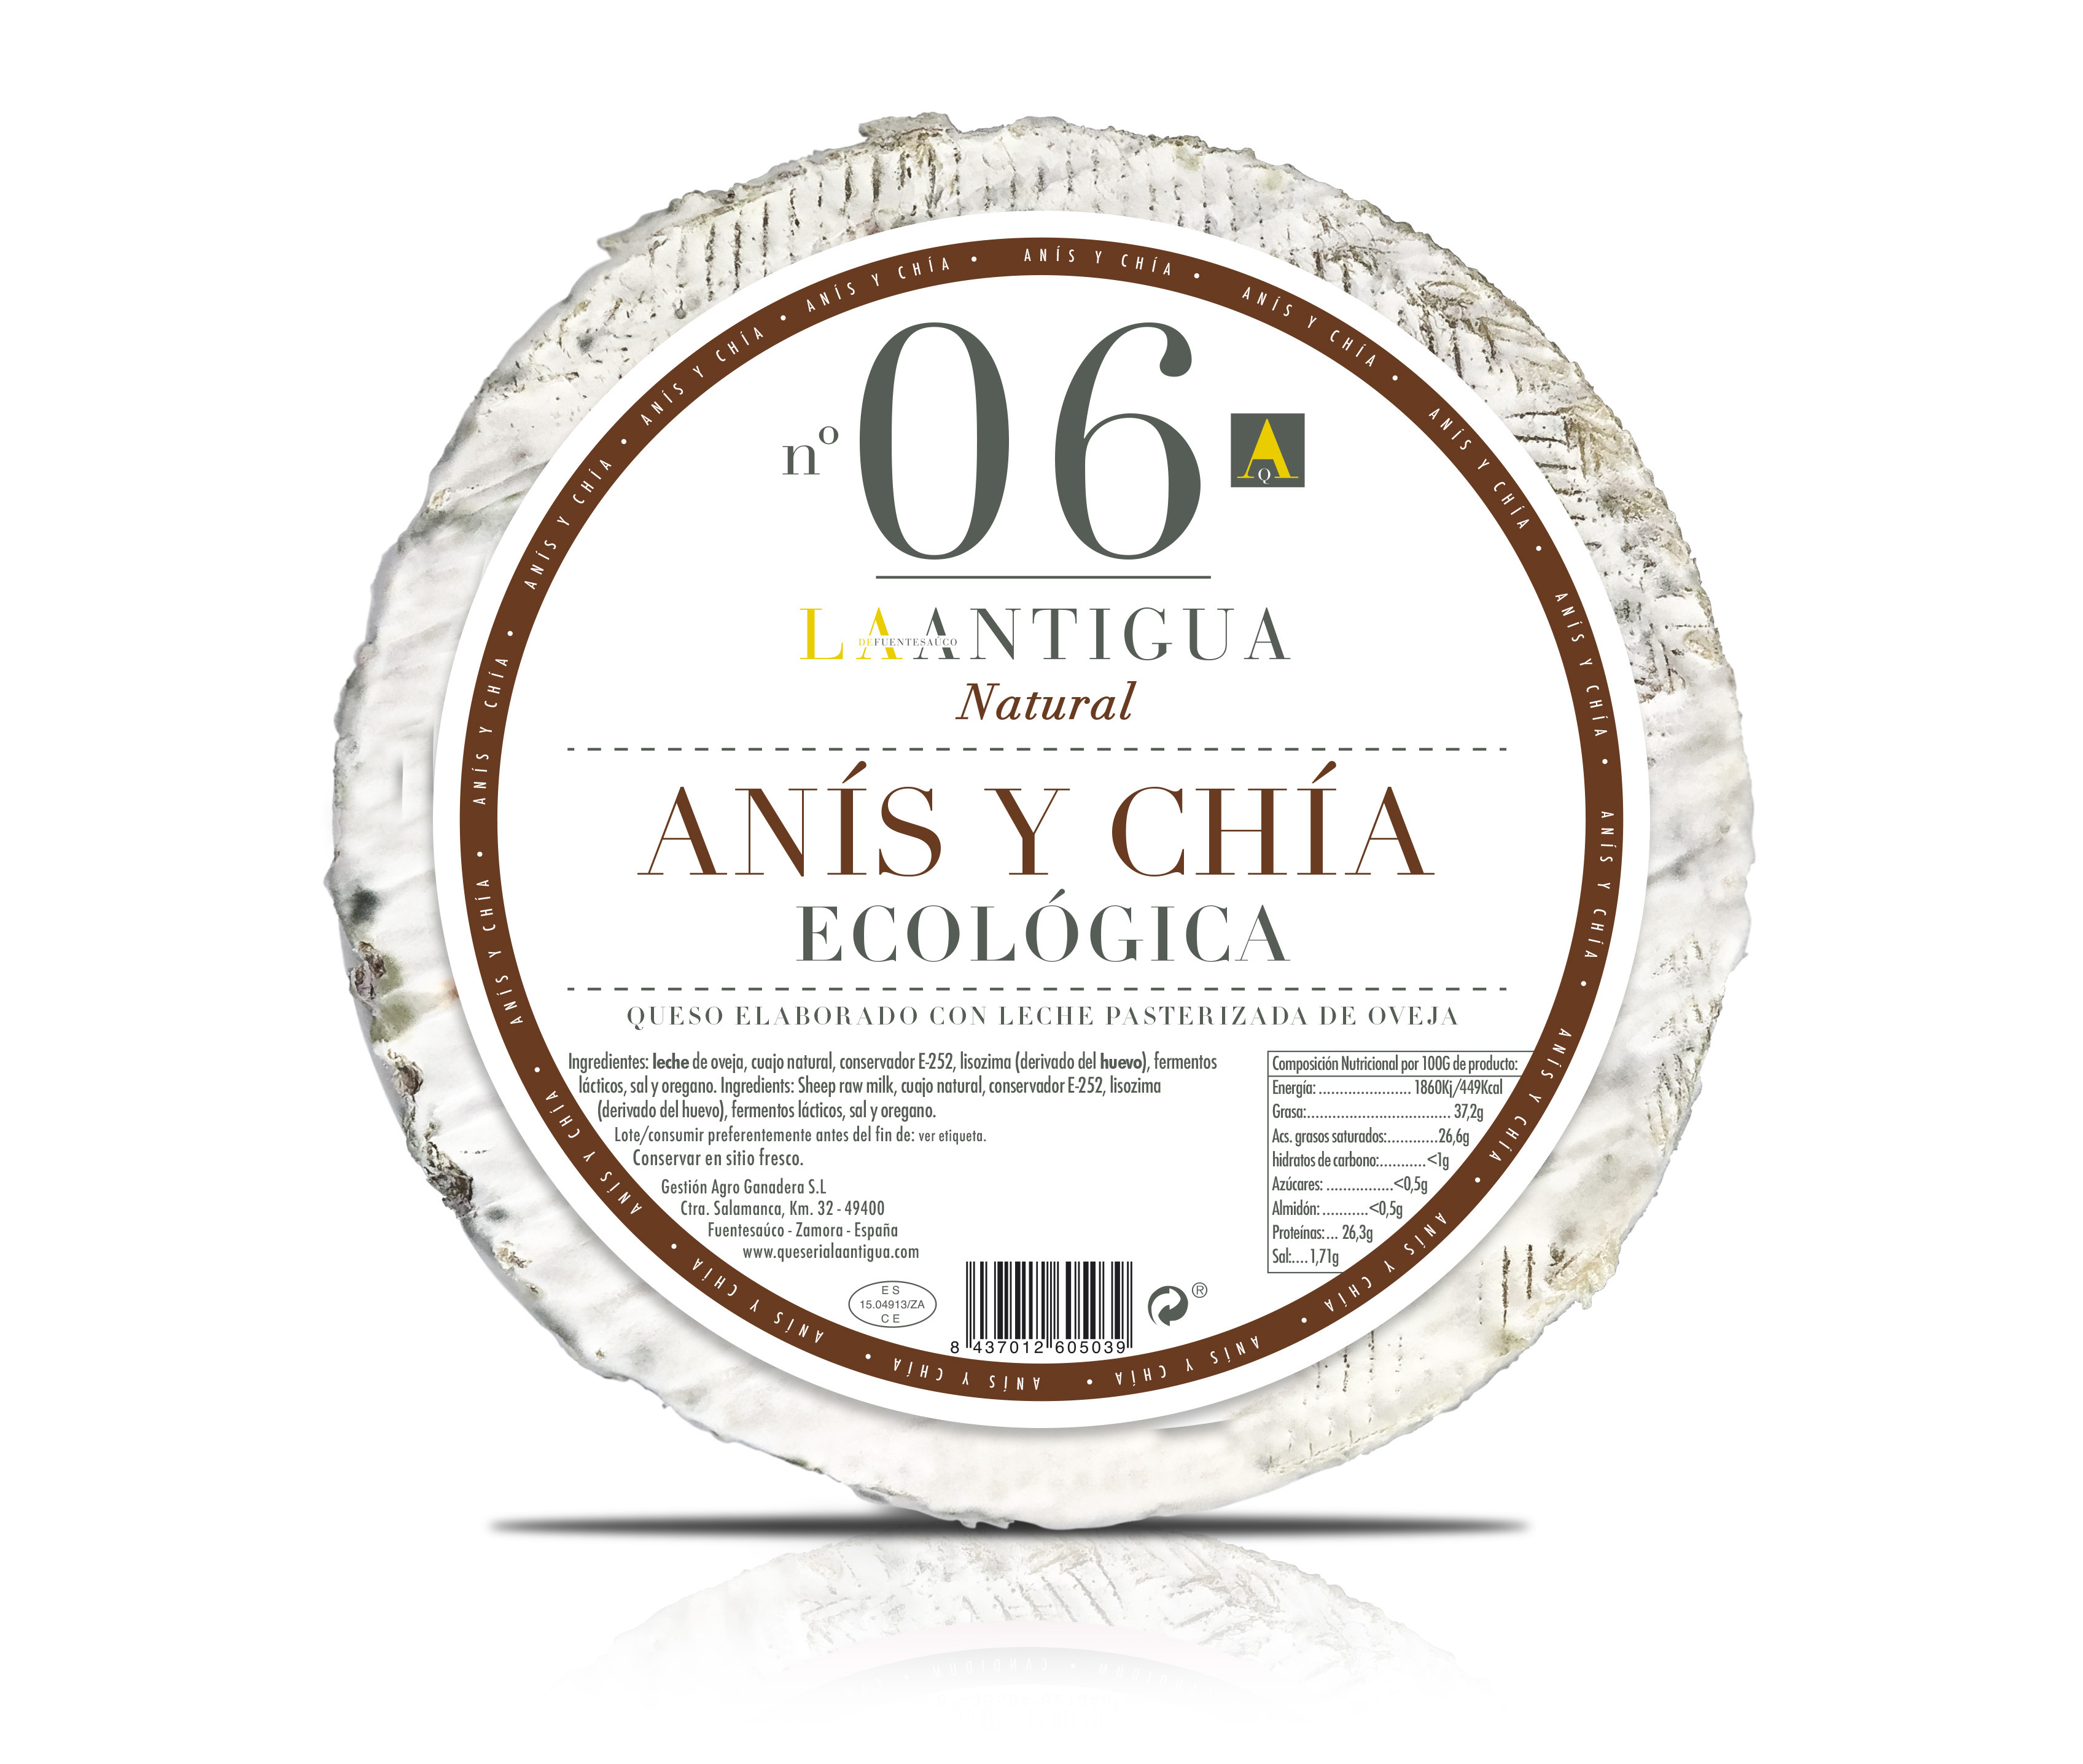 Chia and Quinoa in our cheeses? Natural Line.